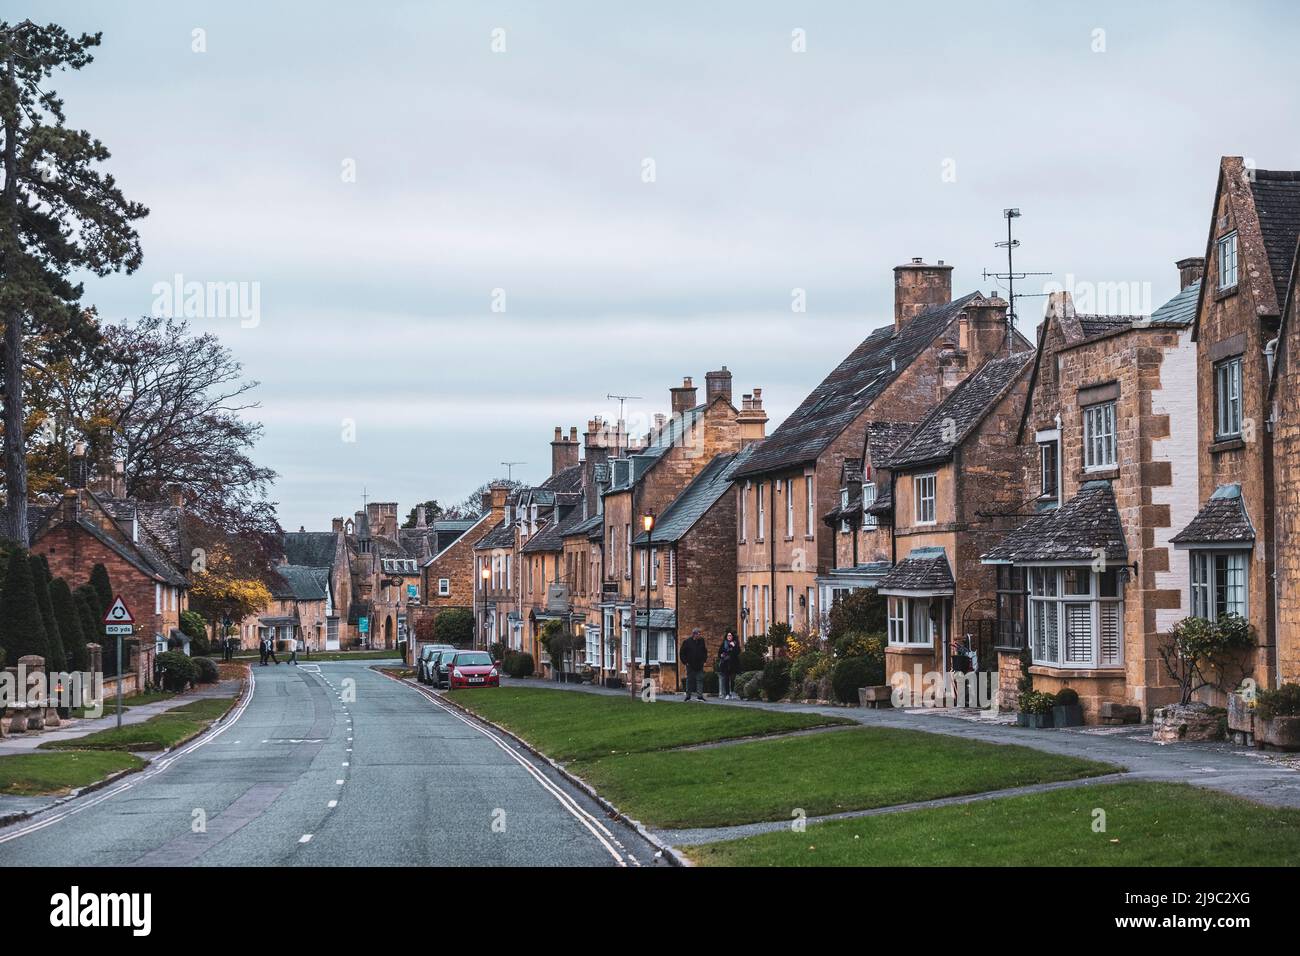 The yellow Cotswold stone of these pubs and houses makes this a picturesque scene. Stock Photo